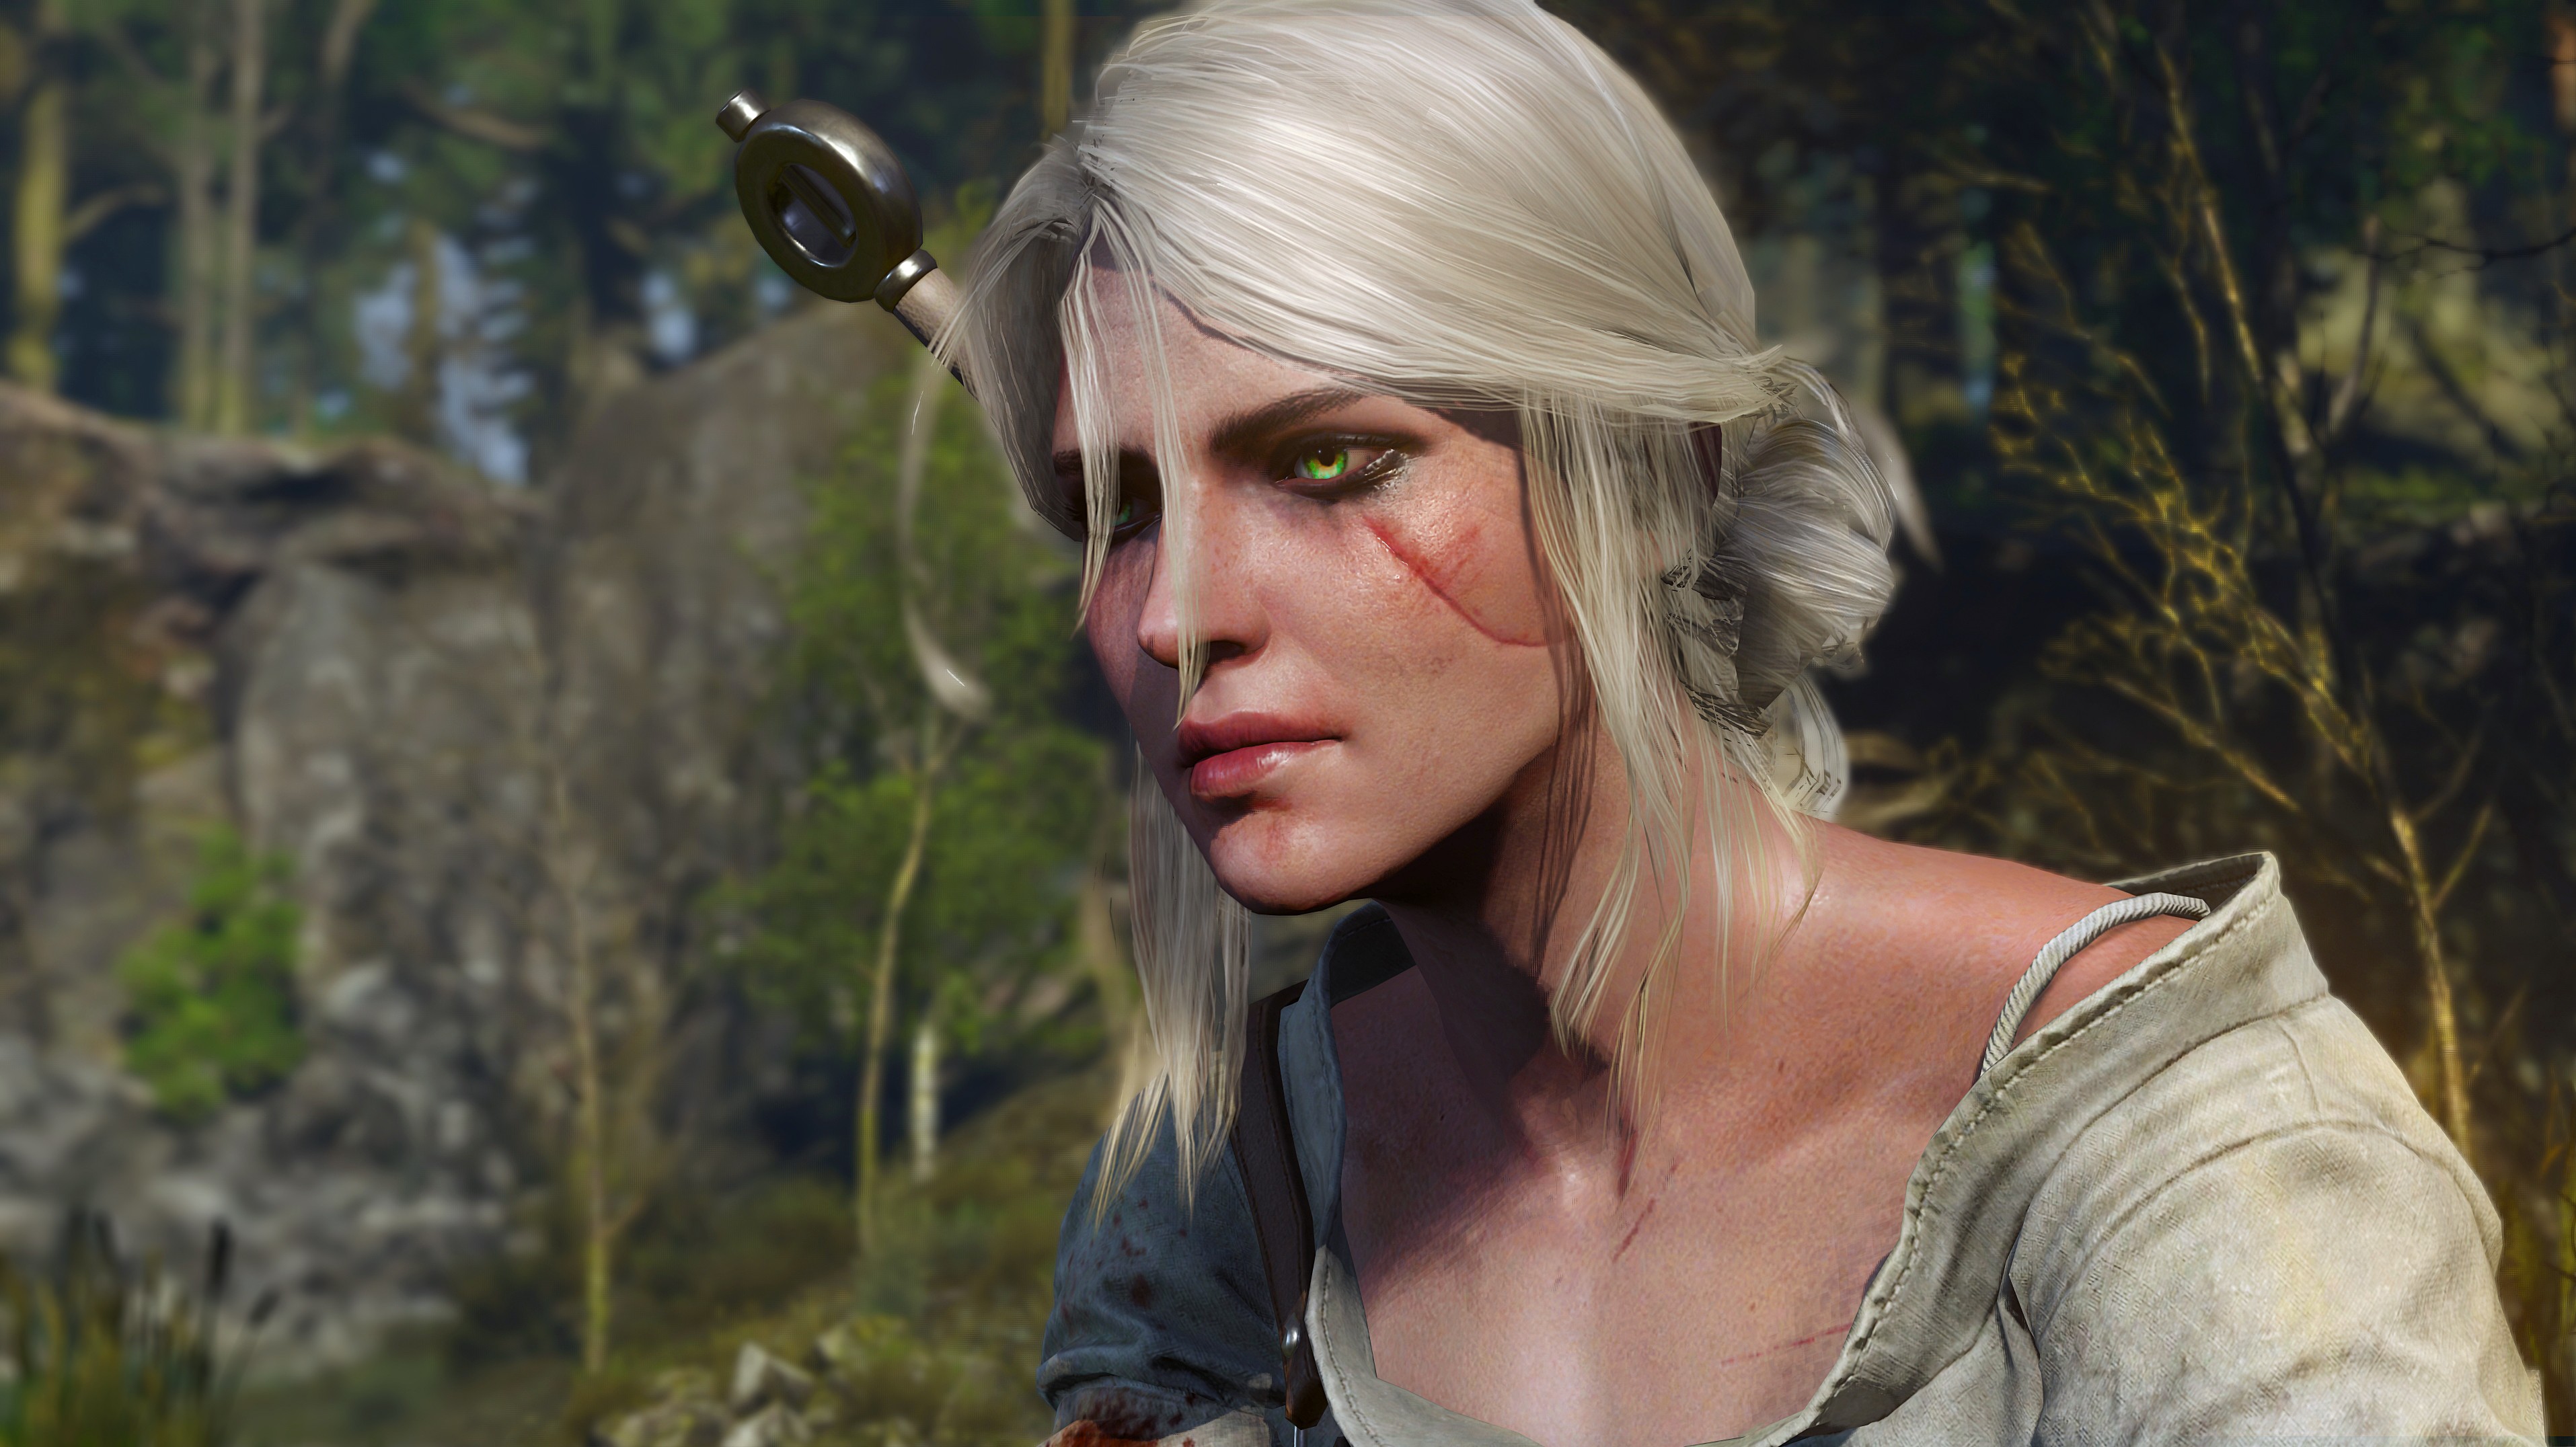 General 3830x2152 Cirilla Fiona Elen Riannon The Witcher 3: Wild Hunt The Witcher video games fantasy girl white hair CD Projekt RED video game characters video game girls green eyes scars